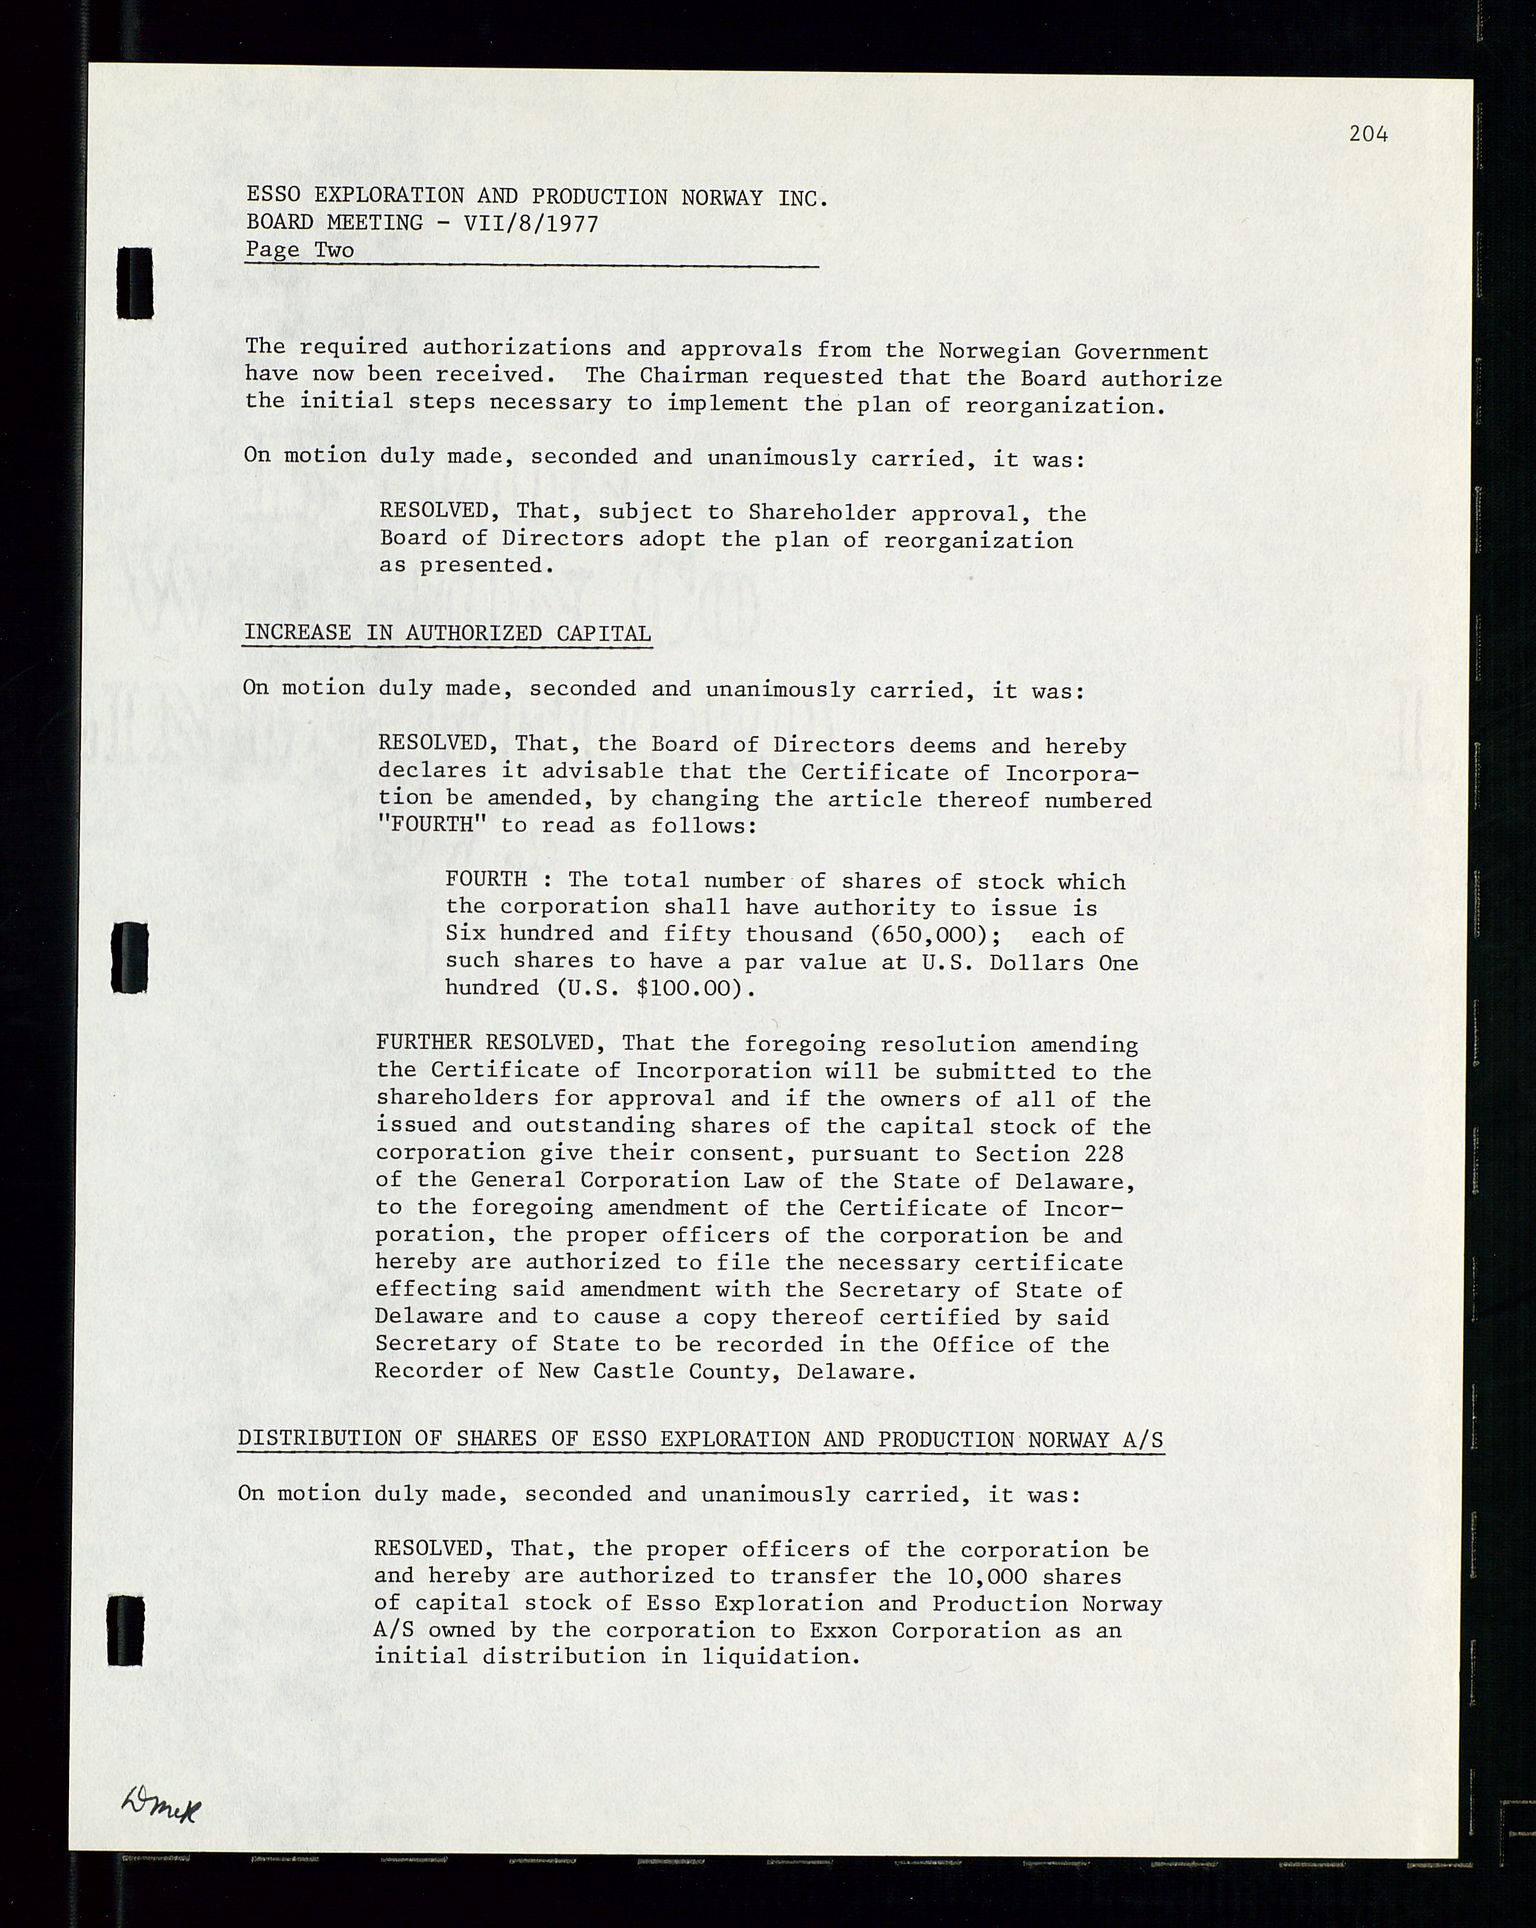 Pa 1512 - Esso Exploration and Production Norway Inc., SAST/A-101917/A/Aa/L0001/0002: Styredokumenter / Corporate records, Board meeting minutes, Agreements, Stocholder meetings, 1975-1979, p. 55